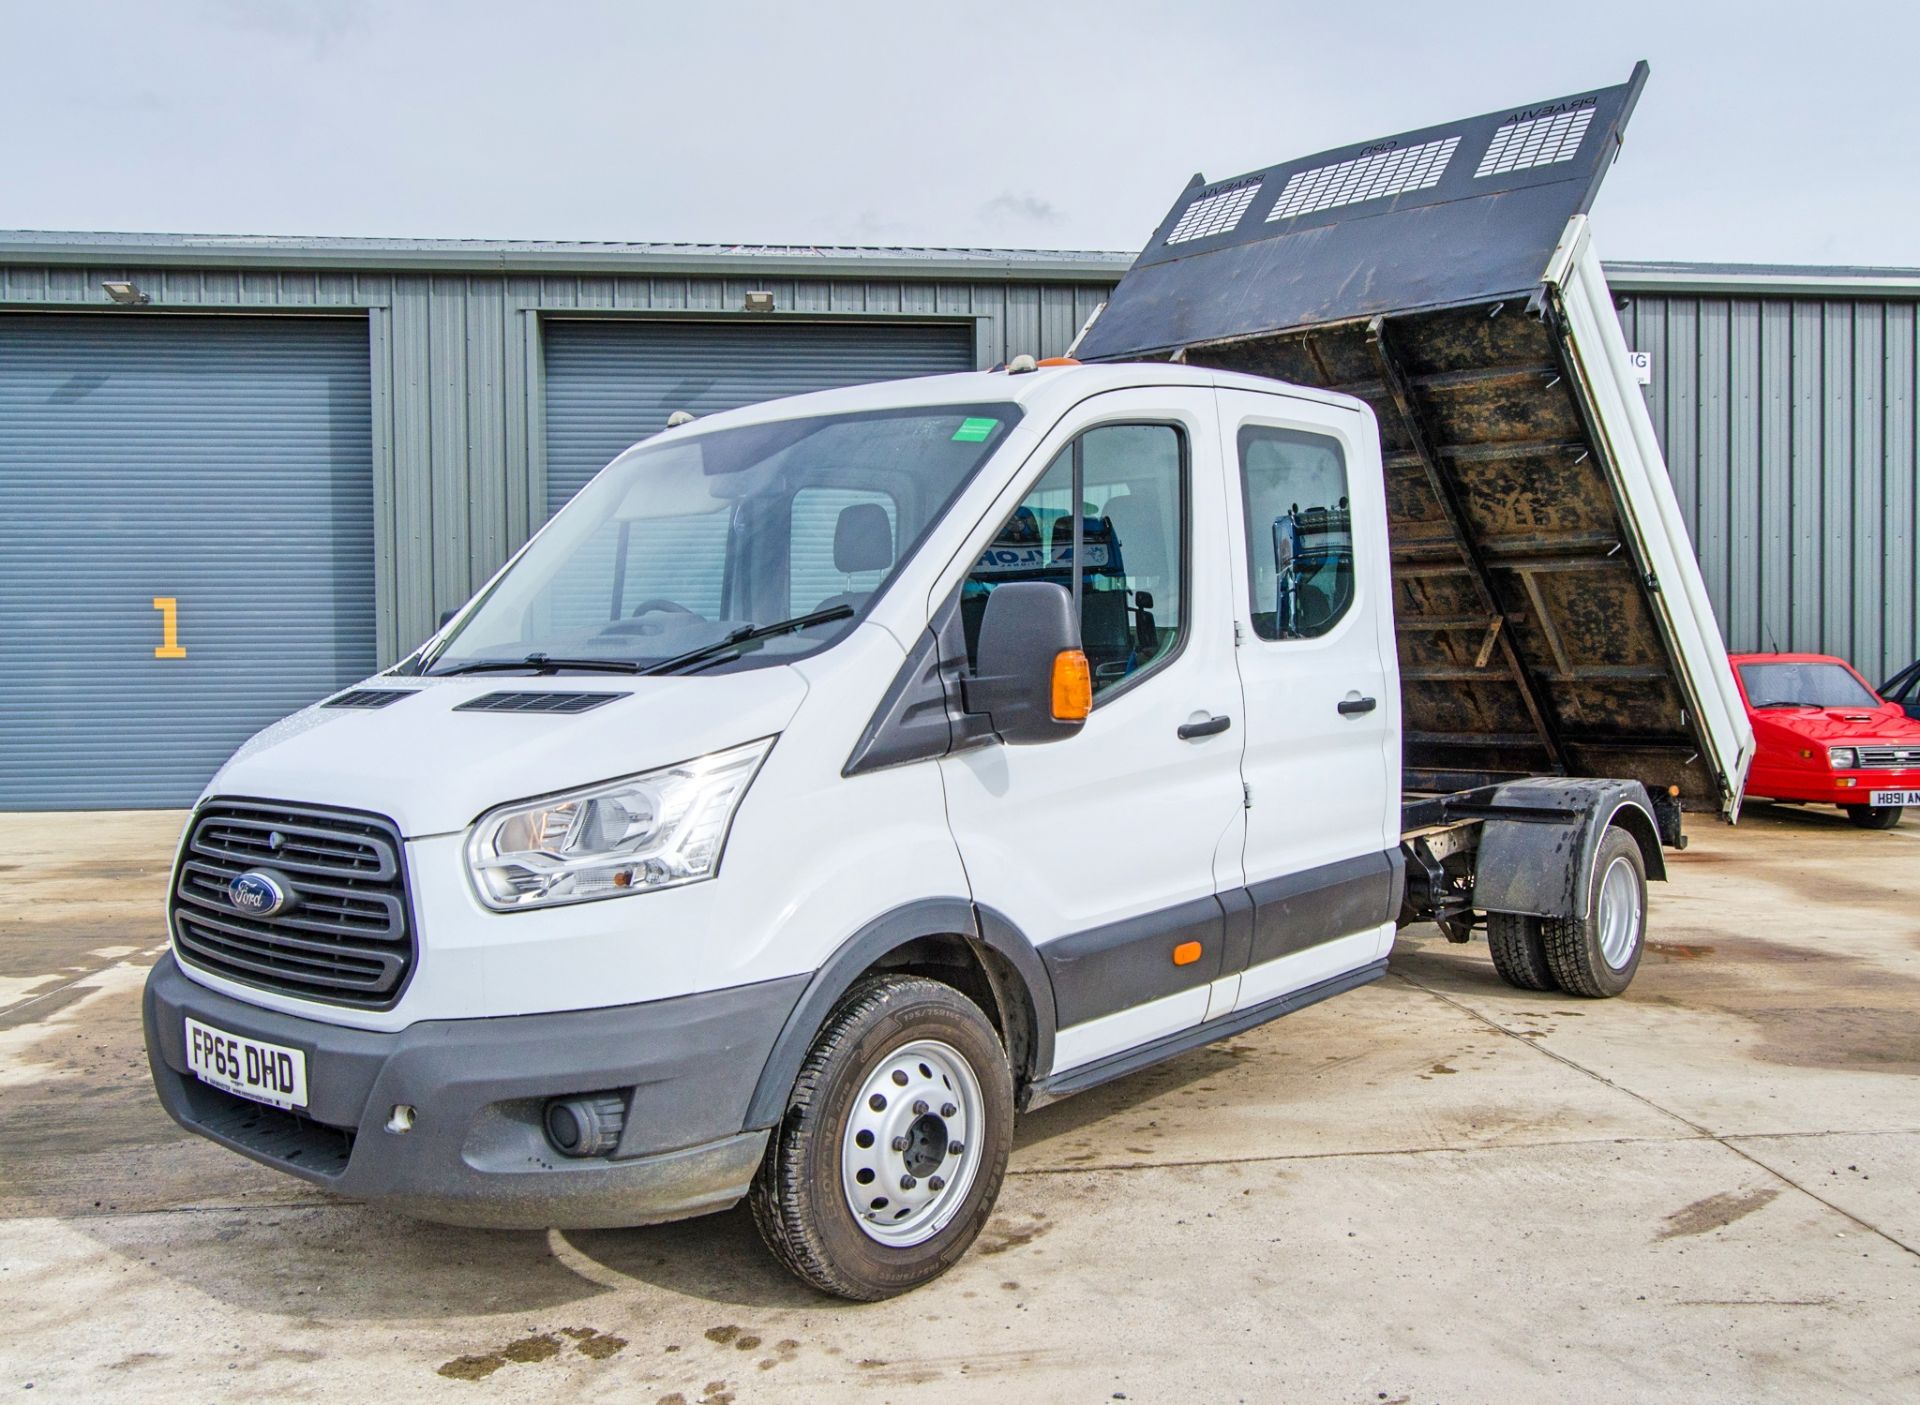 Ford Transit 350 2198cc 6 speed manual crew cab tipper  Registration Number: FP65 DHD Date of - Image 13 of 35